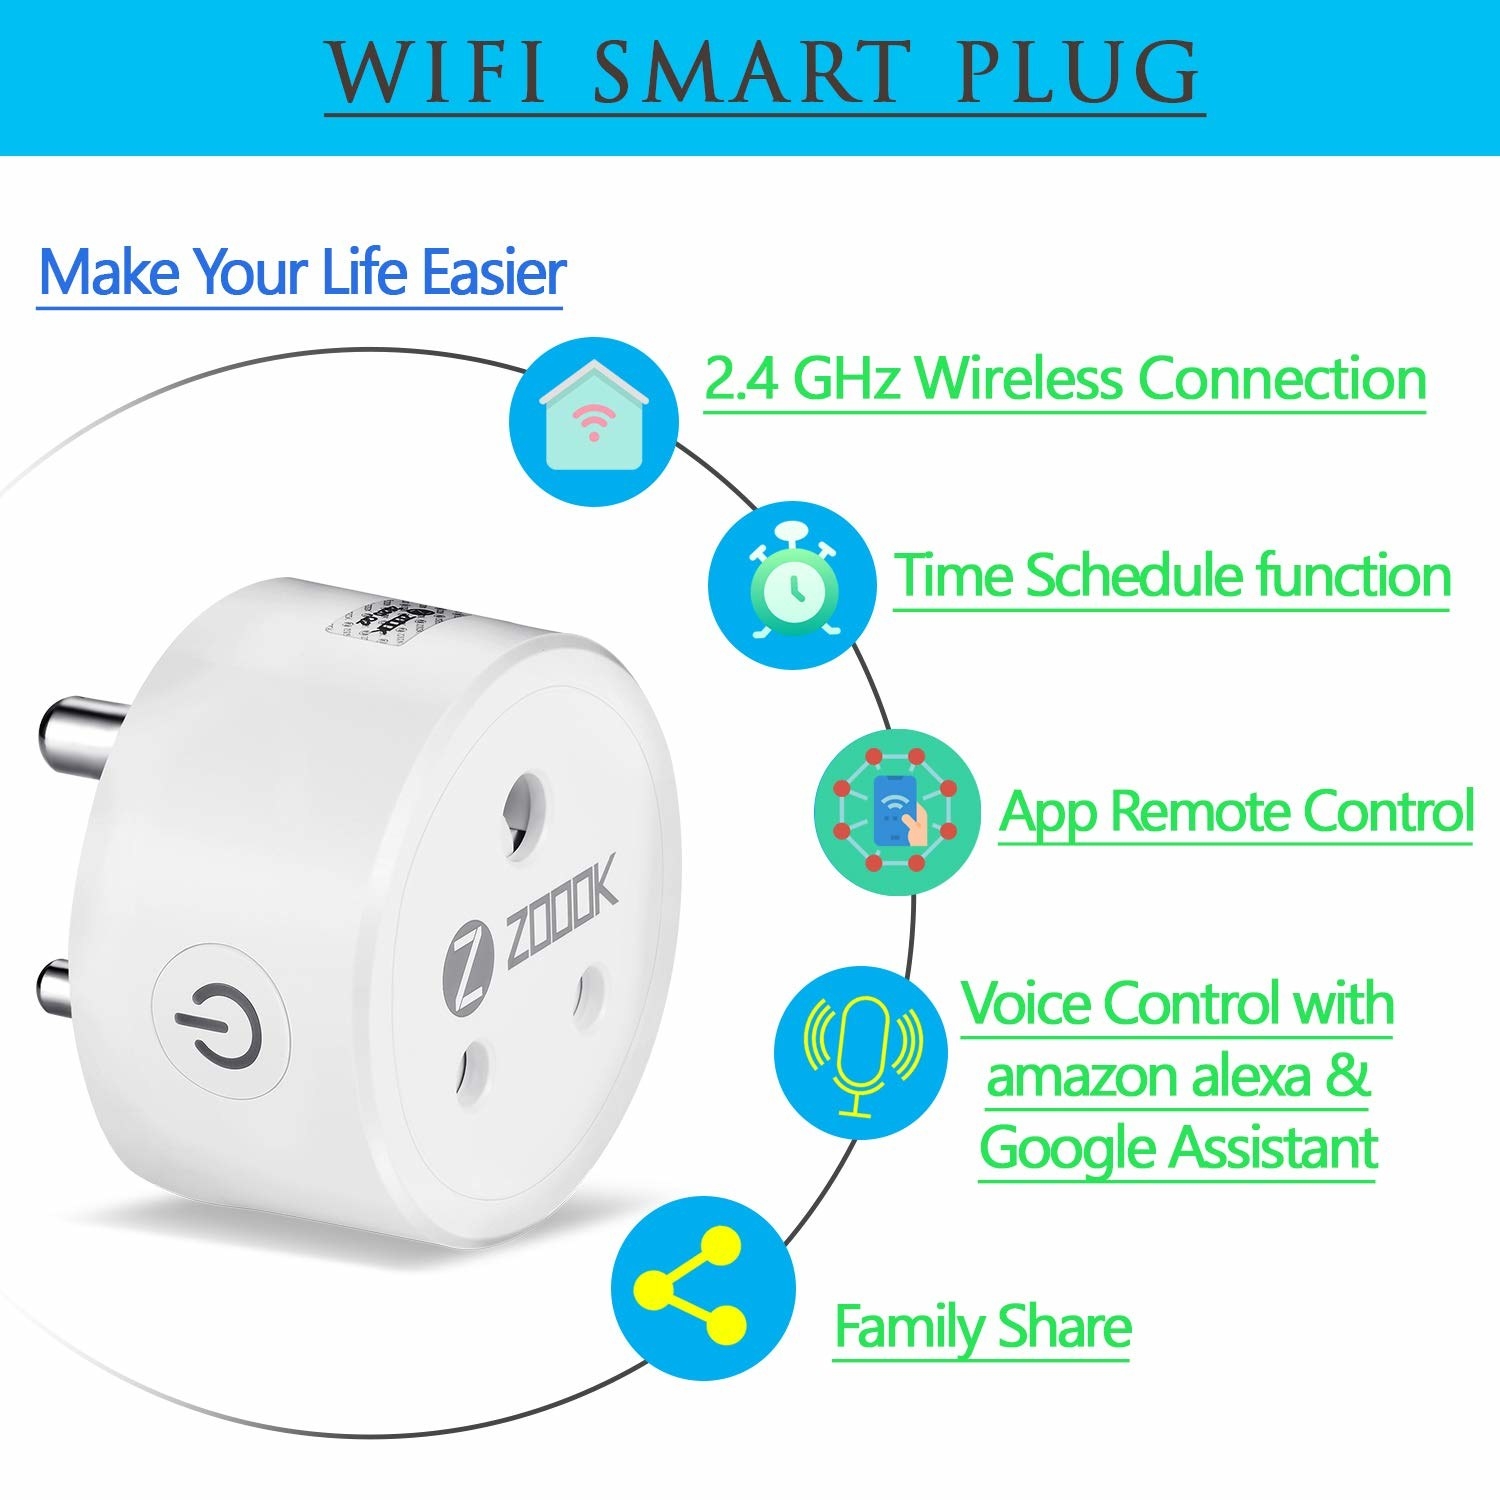 A Zoook smart plug with text that lists features such as &quot;App Remote Control and Voice Control with Amazon Alexa and Google Assistant&quot;